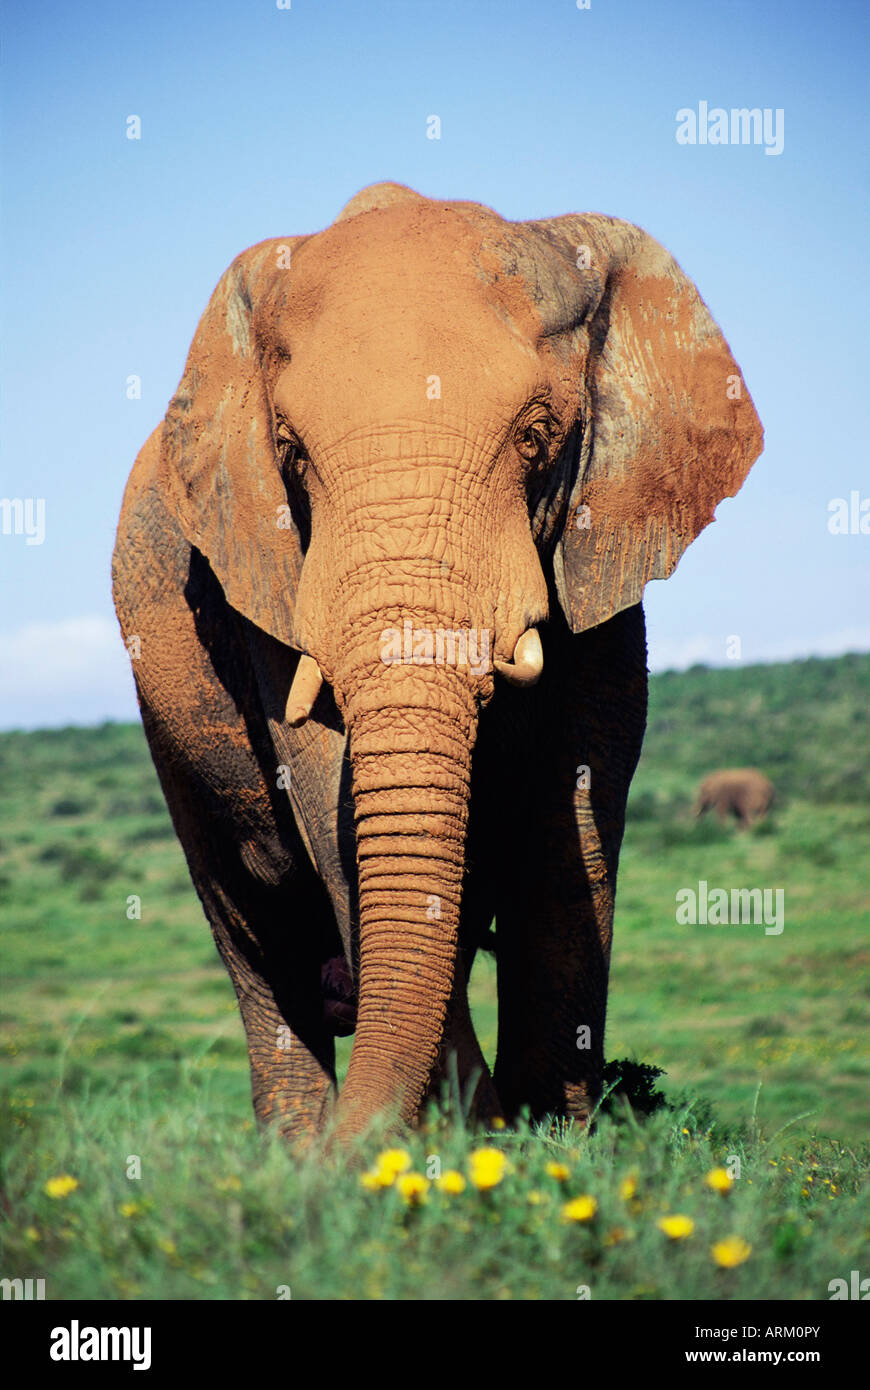 African elephant, Loxodonta africana, covered in mud, Addo, South Africa, Africa Stock Photo